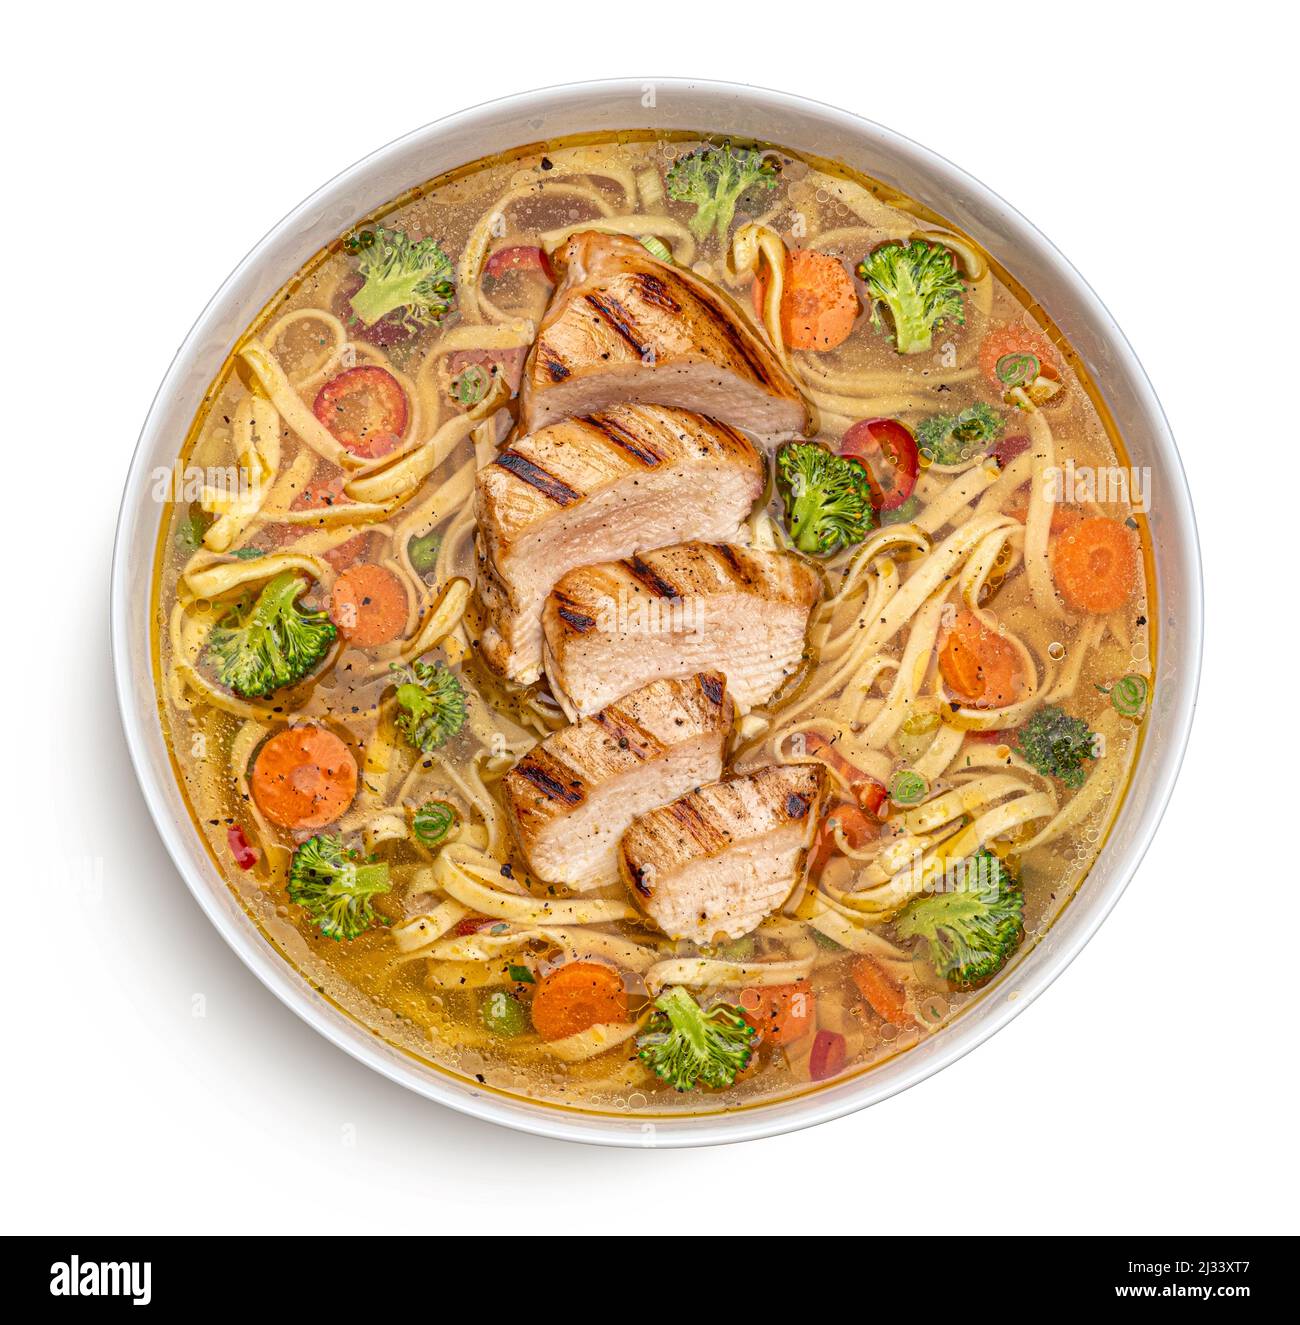 Fettuccine noodles with grilled chicken, top view Stock Photo